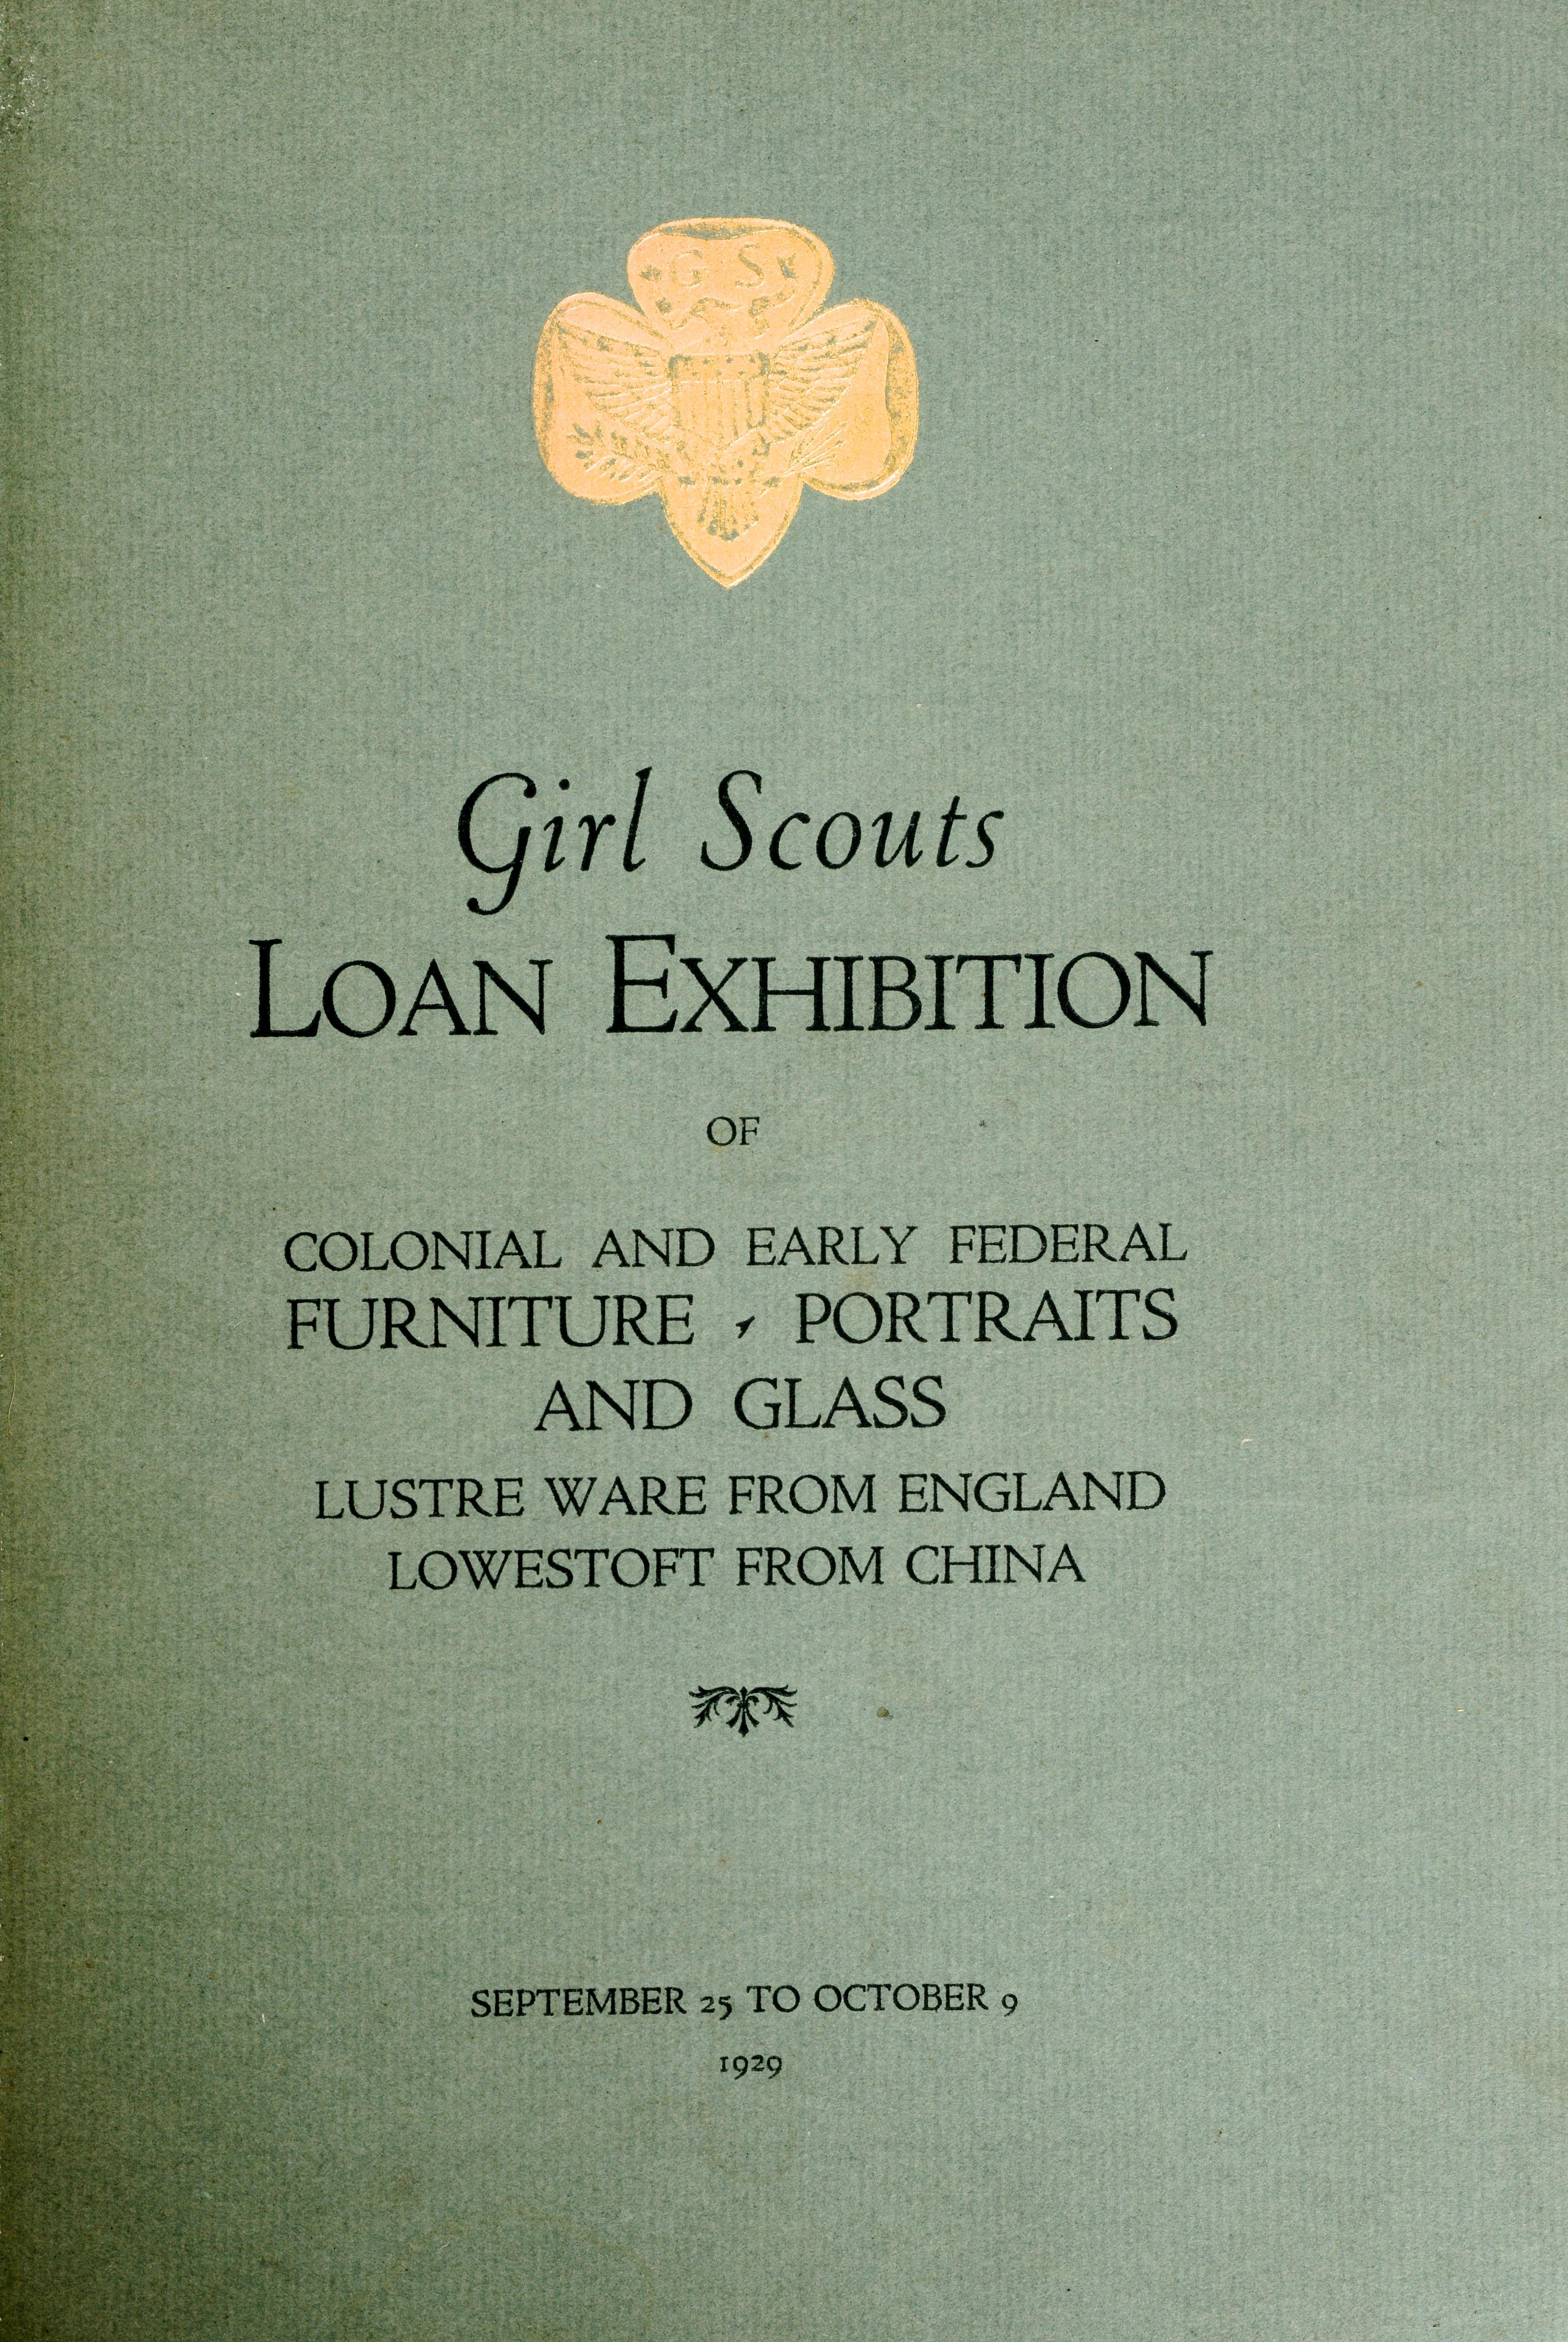 Girl Scouts Loan Exhibition of Colonial and Early Federal Furniture, Portraits and Glass 1929, by American Art Galleries. Published by American Art Galleries, New York, 1929. 1st Ed hardcover. Re-bound in green cloth to preserve the original paper